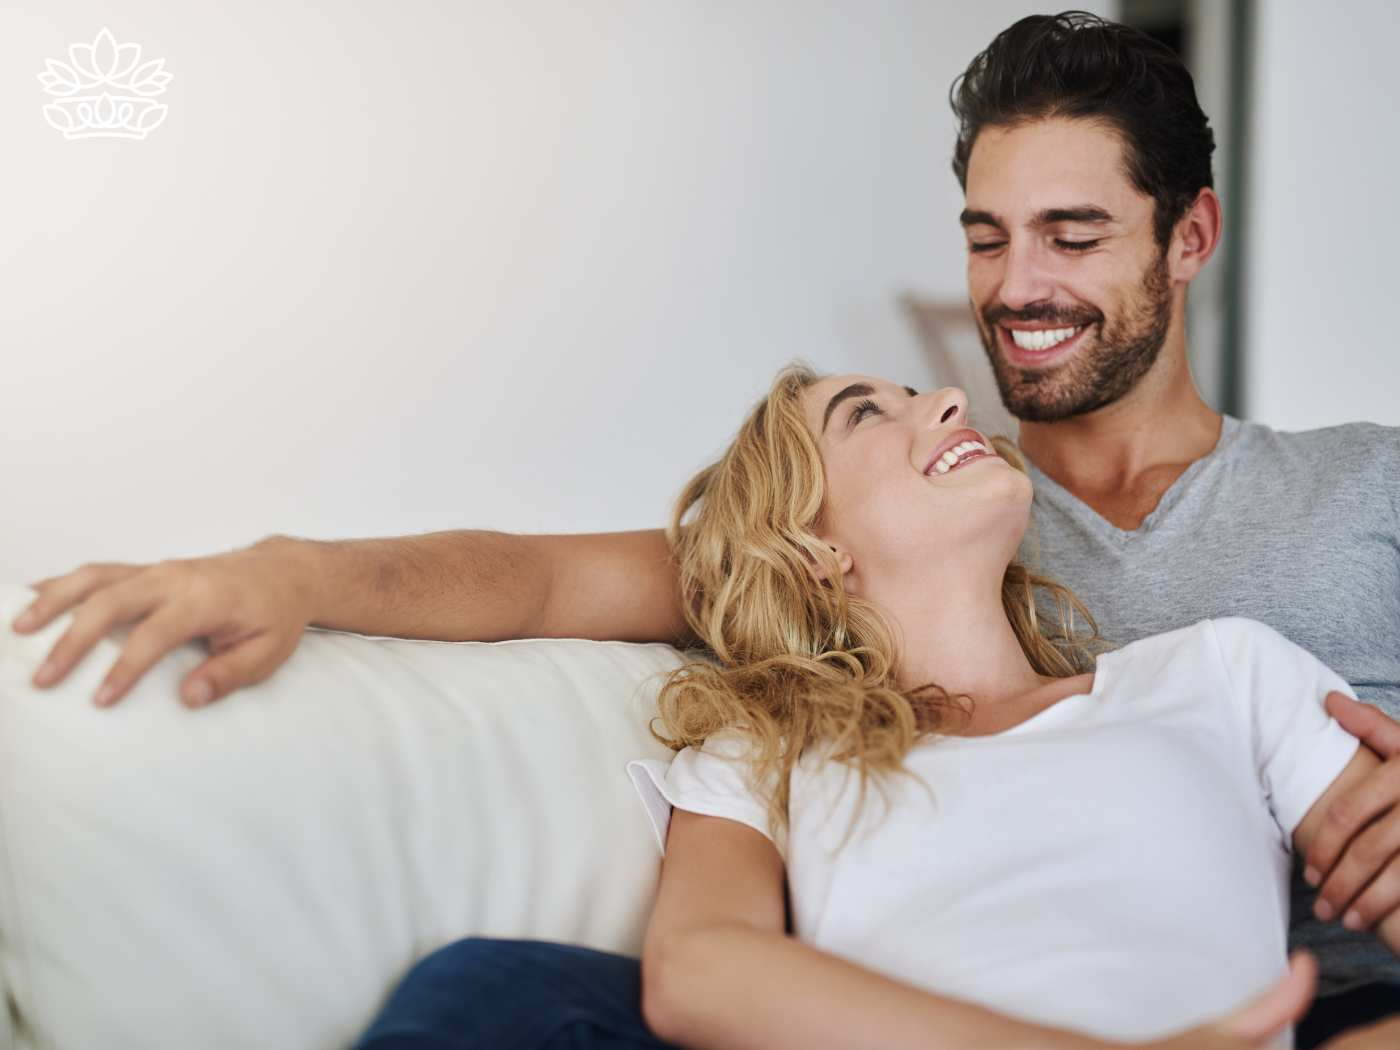 A joyful couple relaxing on a sofa, sharing a laugh in a cozy, bright living room. The man is embracing the woman, who lies back comfortably, reflecting a moment of genuine happiness and intimacy. Perfect scene for celebrating love with Fabulous Flowers and Gifts. Gift Boxes for wife. Delivered with Heart.